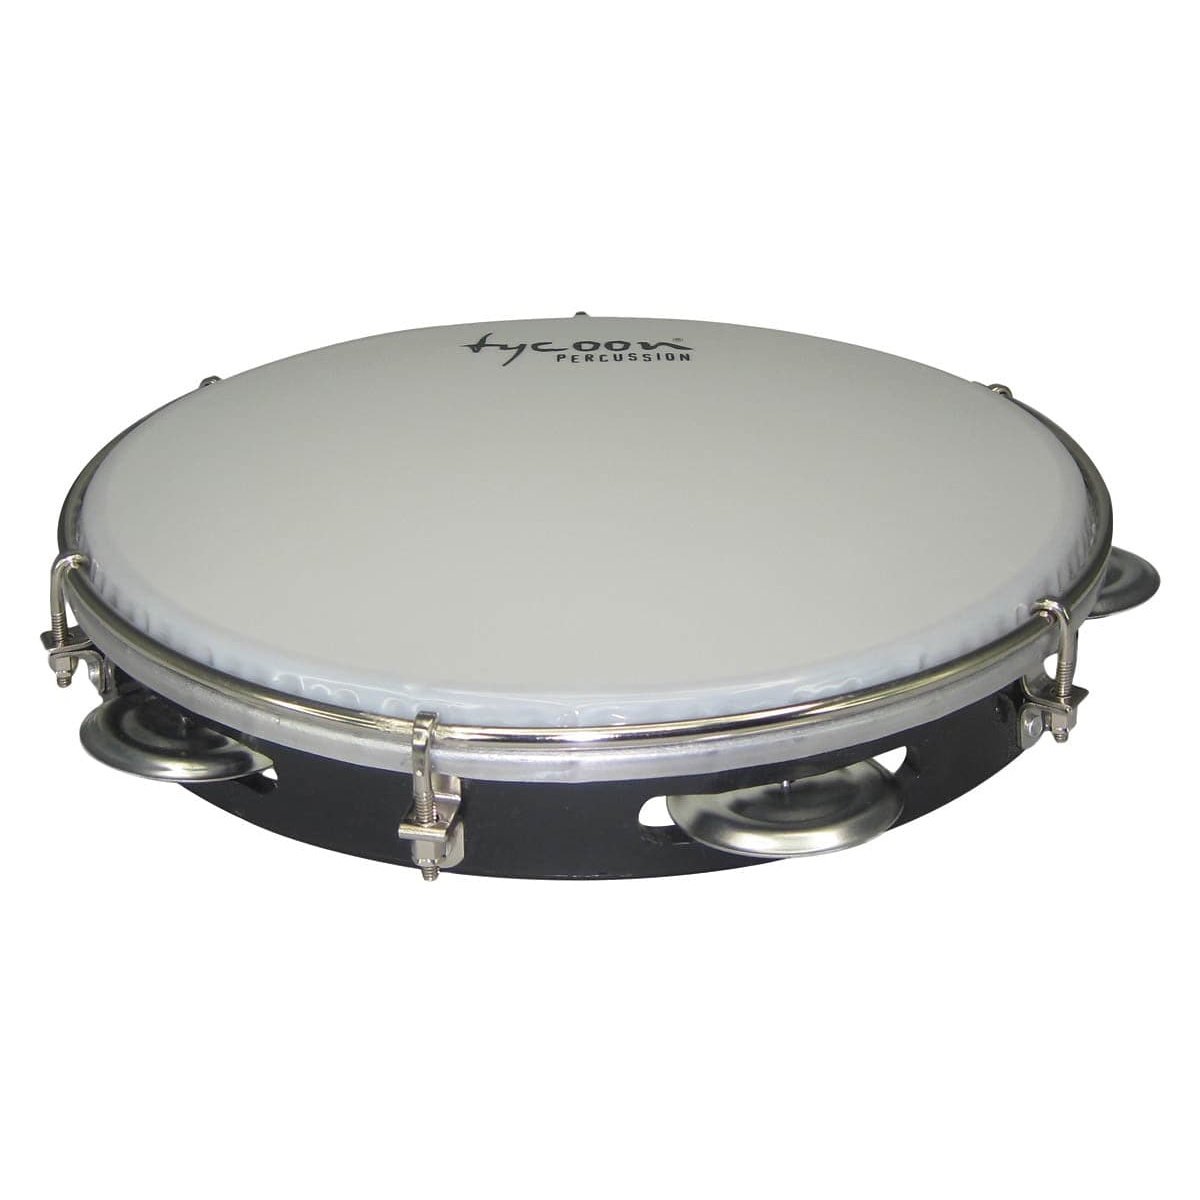 Tycoon Percussion 10 Abs Pandeiro - Black